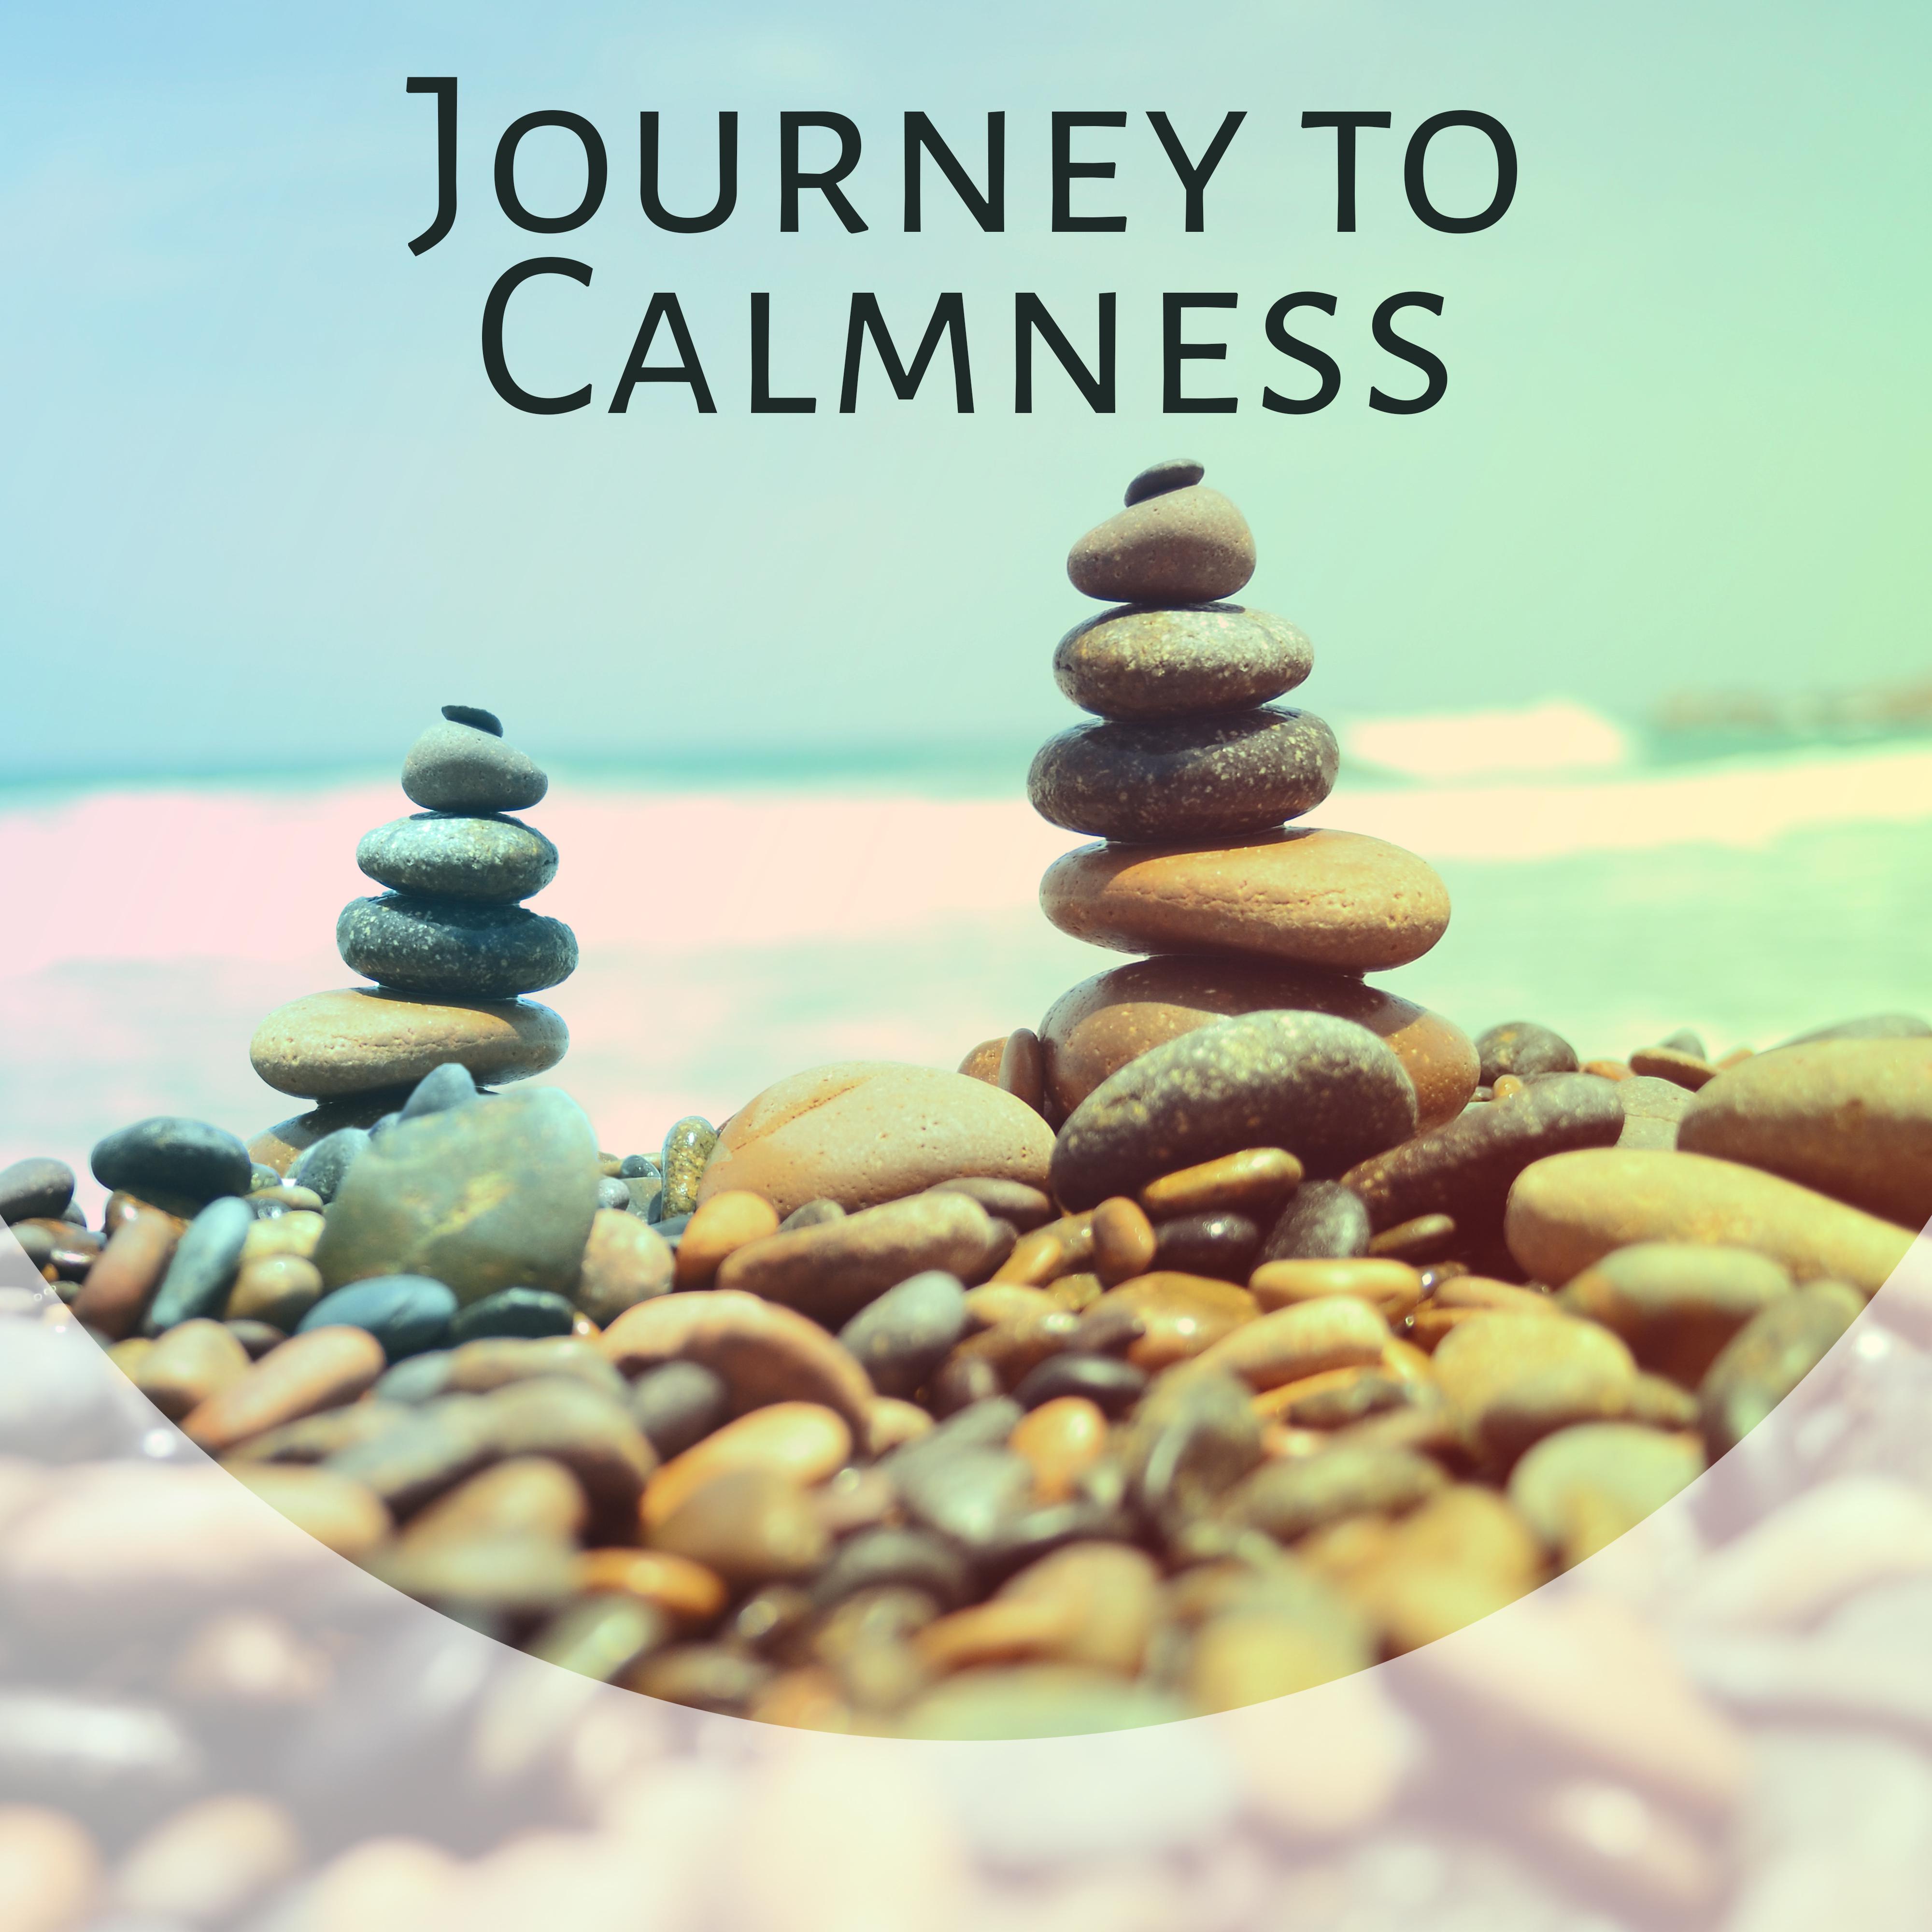 Journey to Calmness – Nature Sounds for Meditation, Yoga, Zen, Concentration, Pure Relaxation, Relaxing Waves